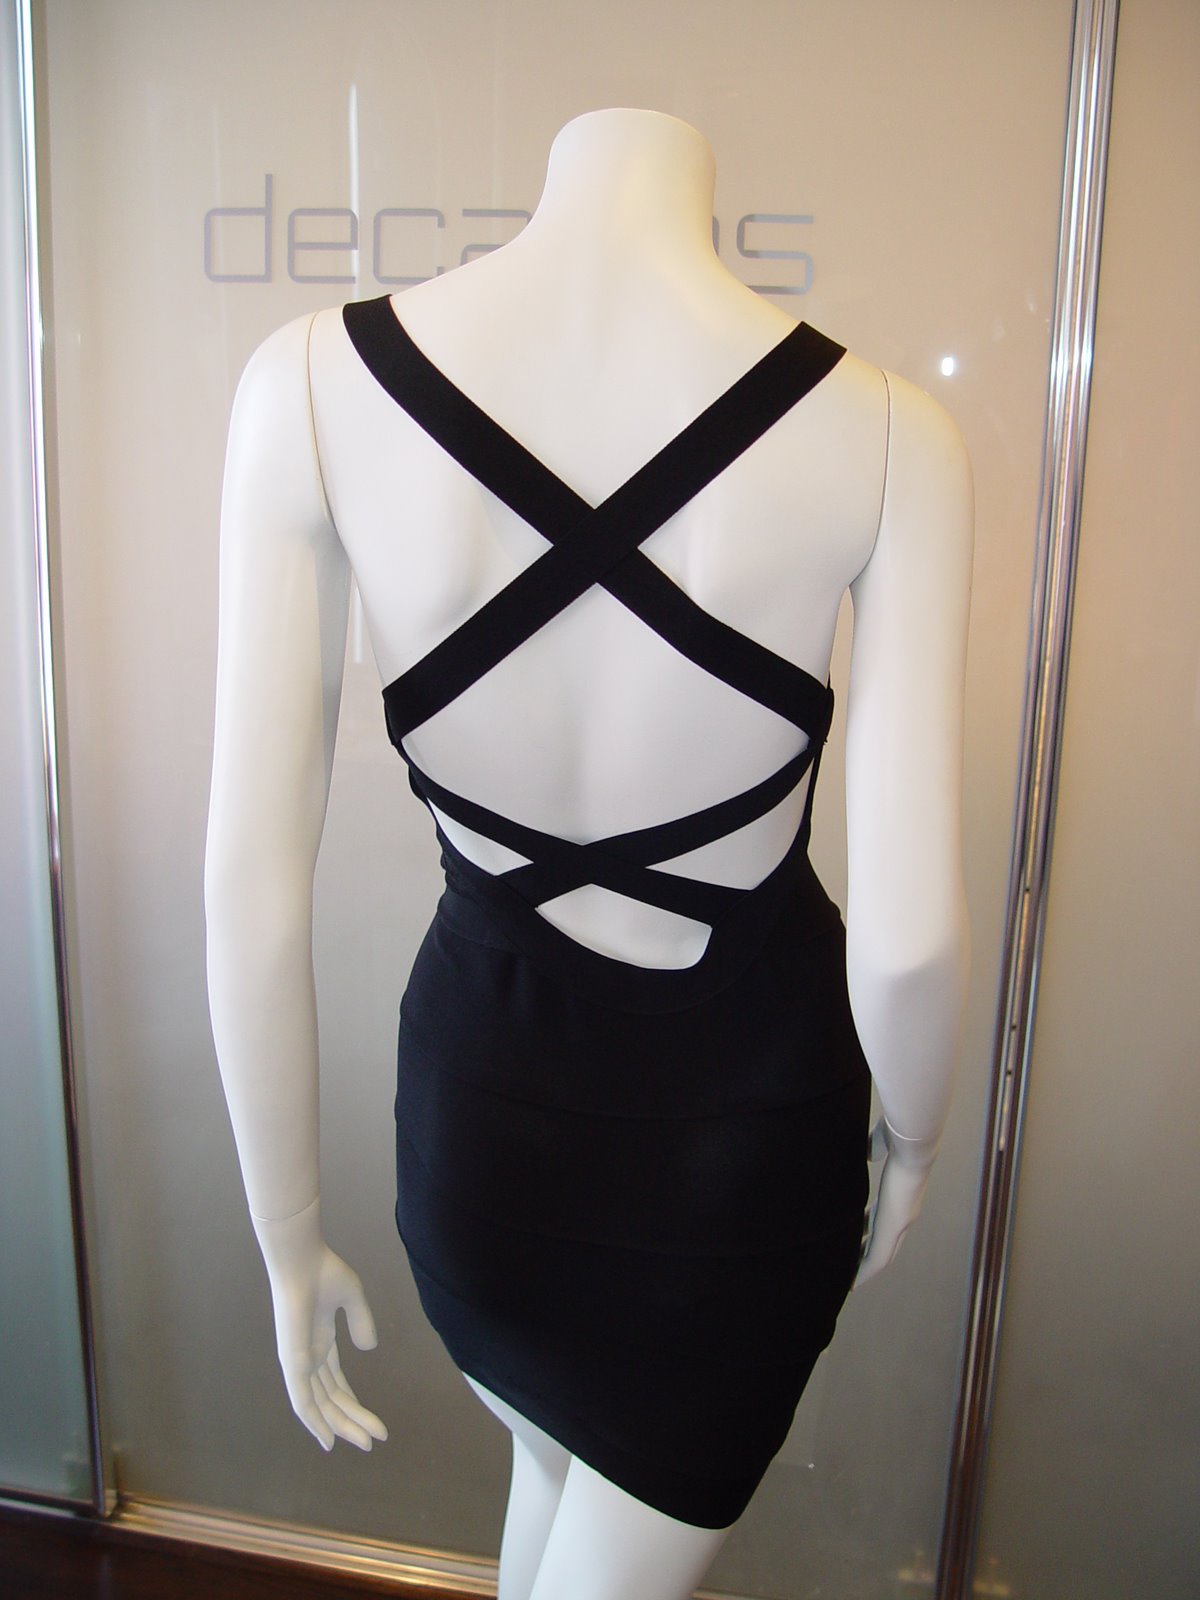 [HERVE+LEGER+BLACK+BANDAGE+DRESS+WITH+SEXY+CRISS+CROSS+BACK+MARKED+SIZE+SMALL+TIGHT+ON+SIZE+FOUR+MANNEQUIN.JPG+(1).JPG]